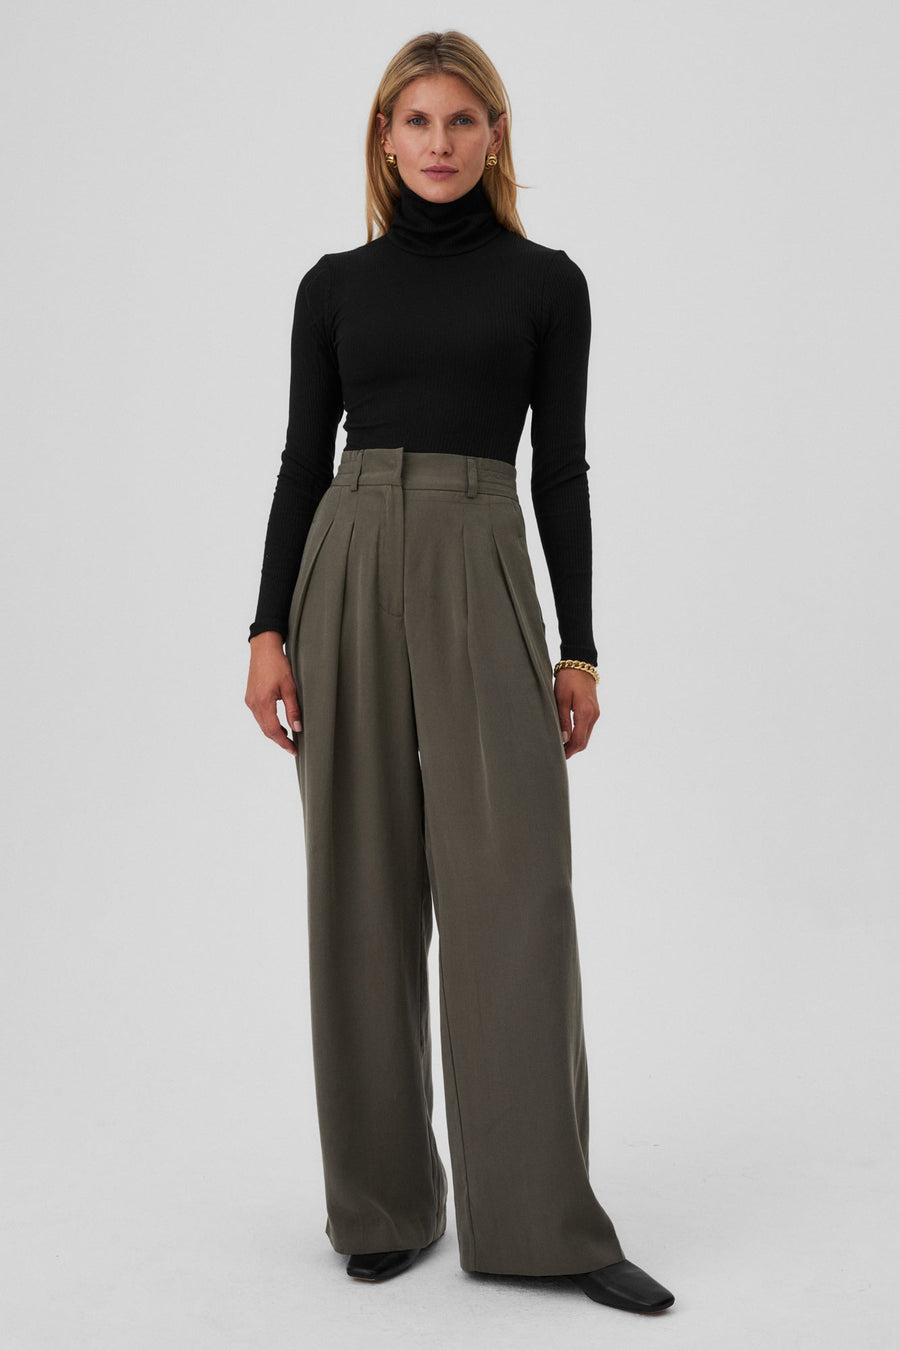 Tencel™ trousers / 05 / 02 / grey moss *bodysuit-in-organic-cotton-01-01-onyx-black* ?The model is 177cm tall and wears size S? |